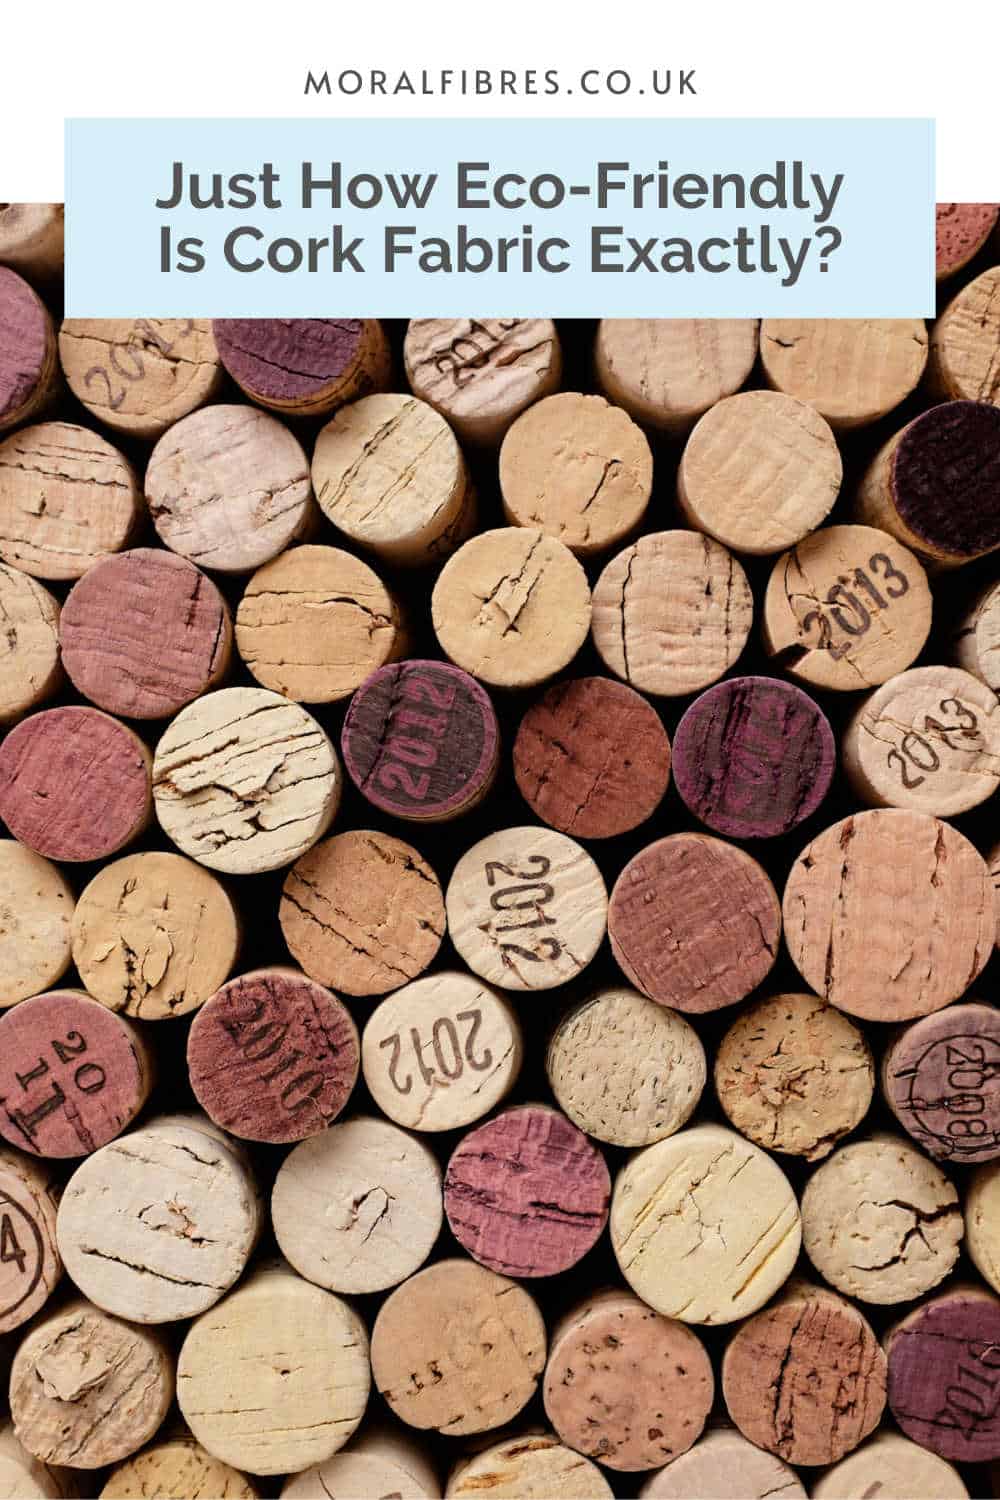 Lots of corks with a blue text box that reads just how eco-friendly is cork fabric exactly?